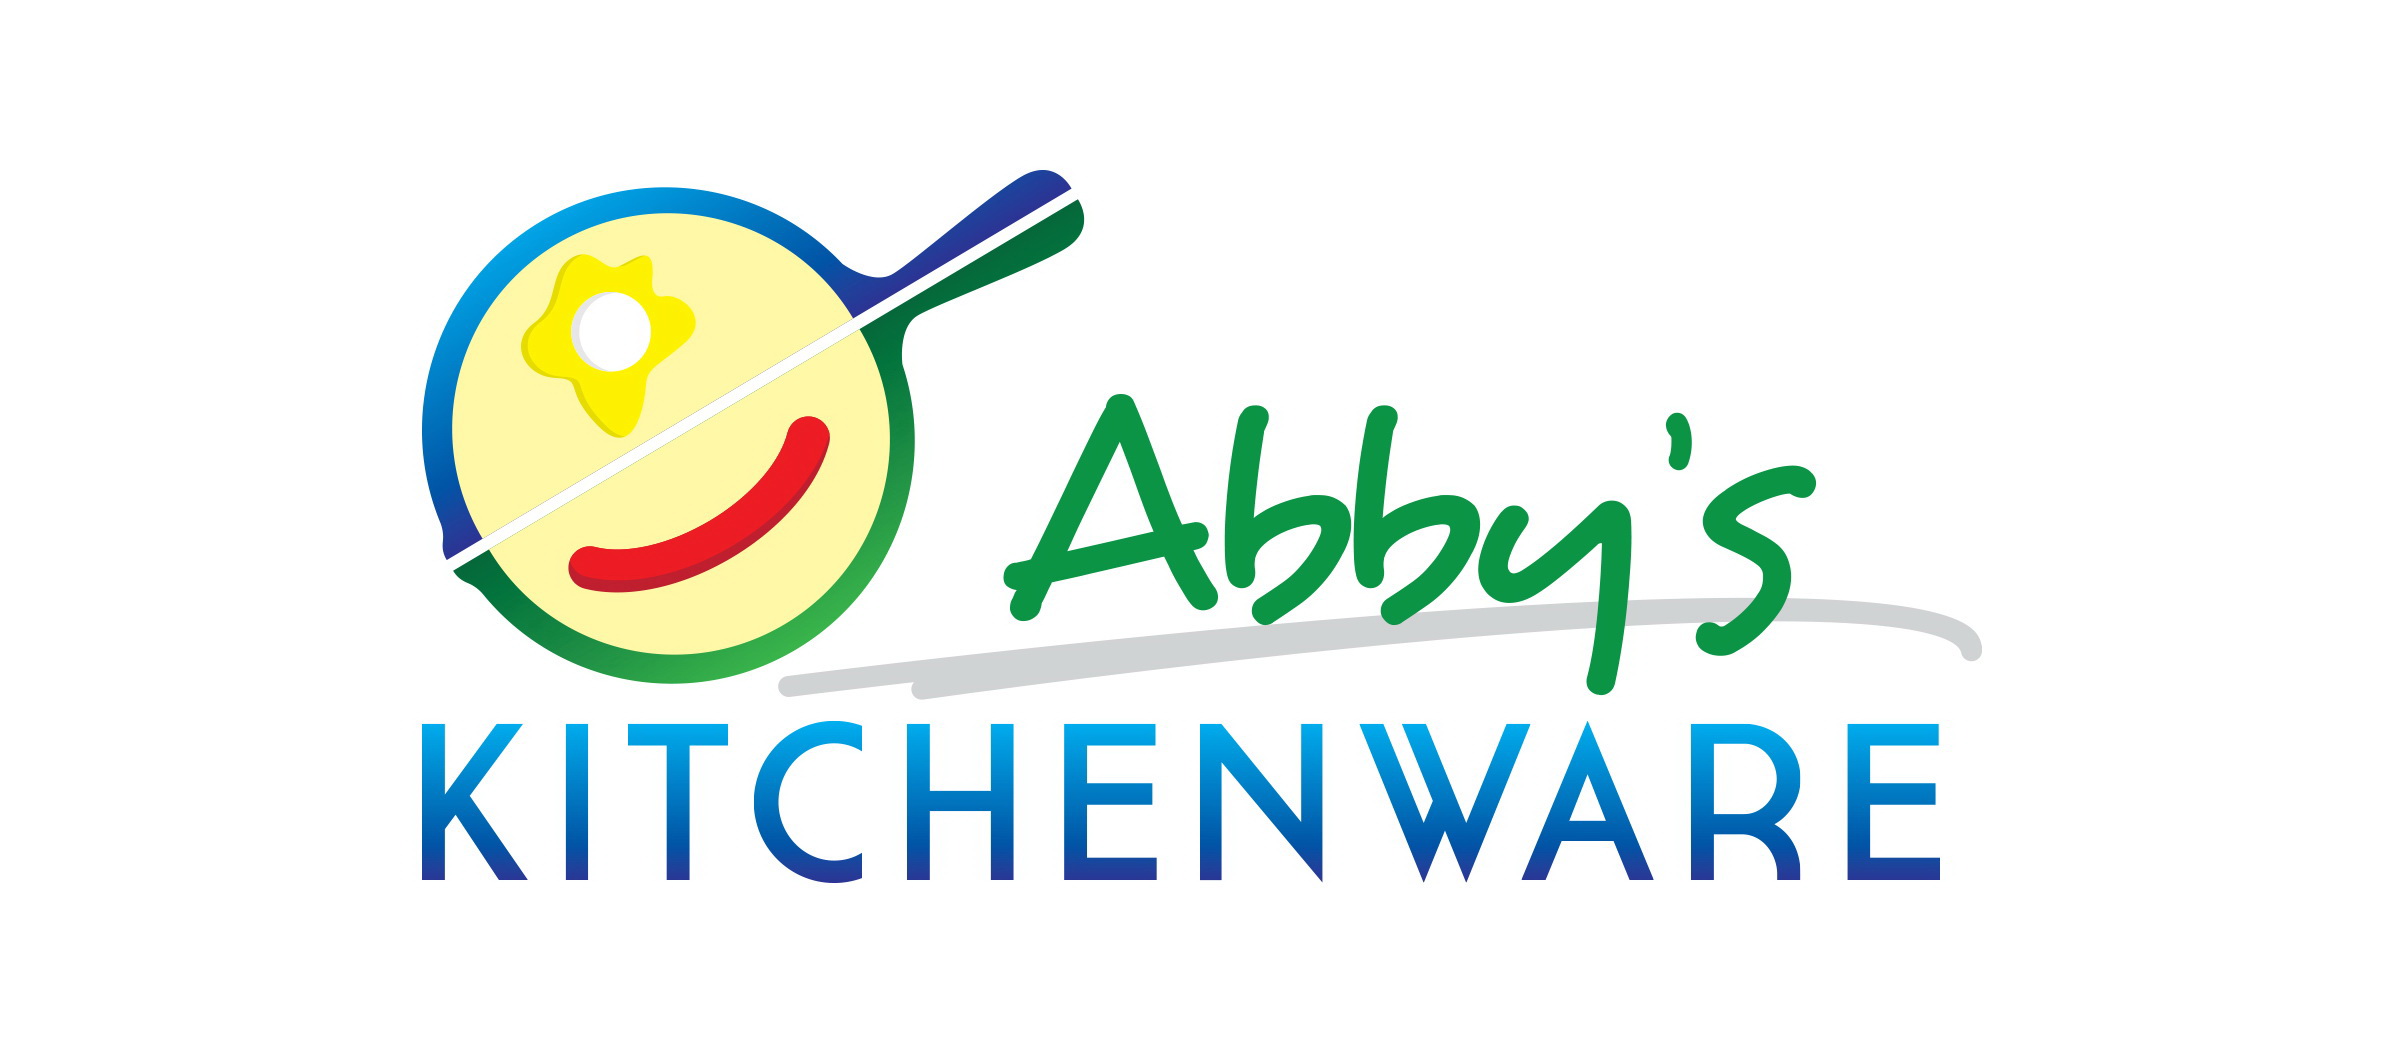 Abby’s Kitchenware, a kitchen invention  designed to provide a better and easier way to cook multiple meals.